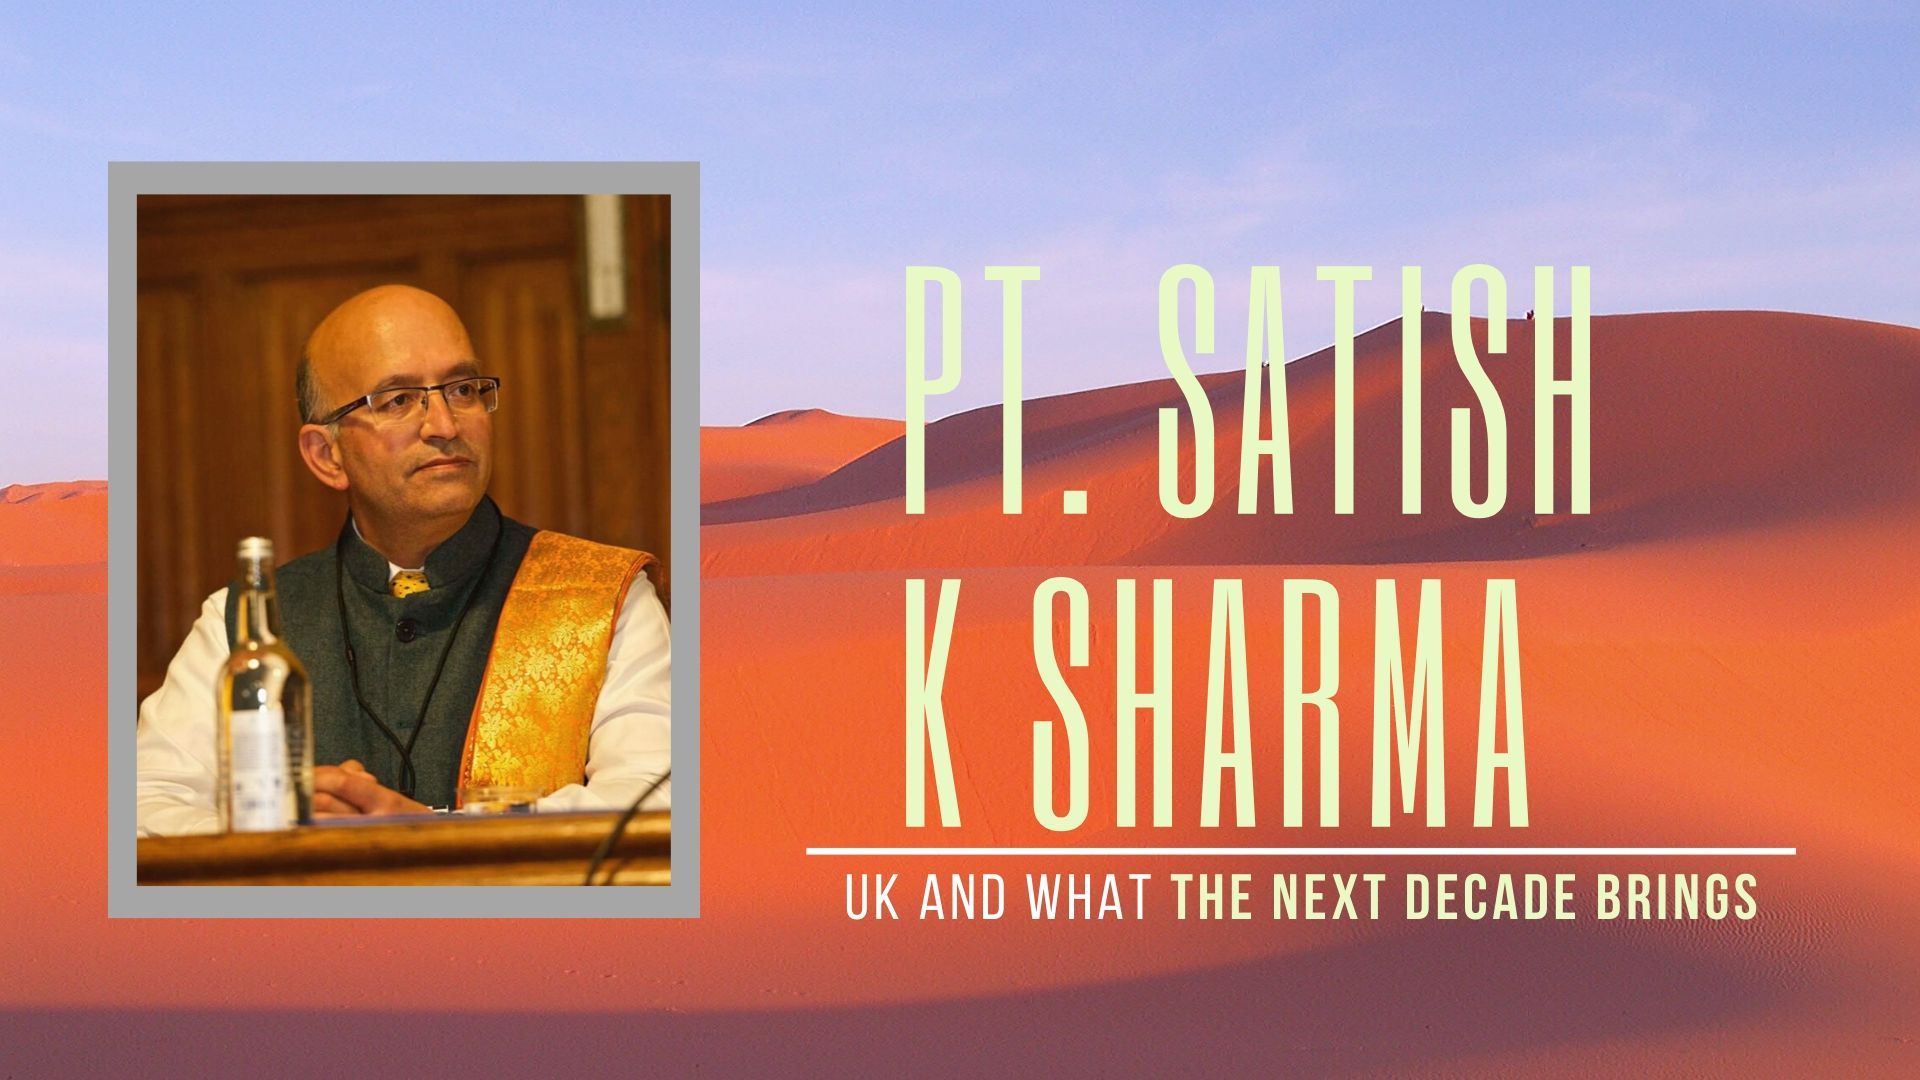 Hangout with Pt Satish K Sharma on what he sees in 2020 for the UK, Hindutva and the World. 12 months to finish BREXIT deal and a view on how the BREXIT blockers faced in the recent elections... Also touched is the new lows the British media (esp. BBC) are plumbing